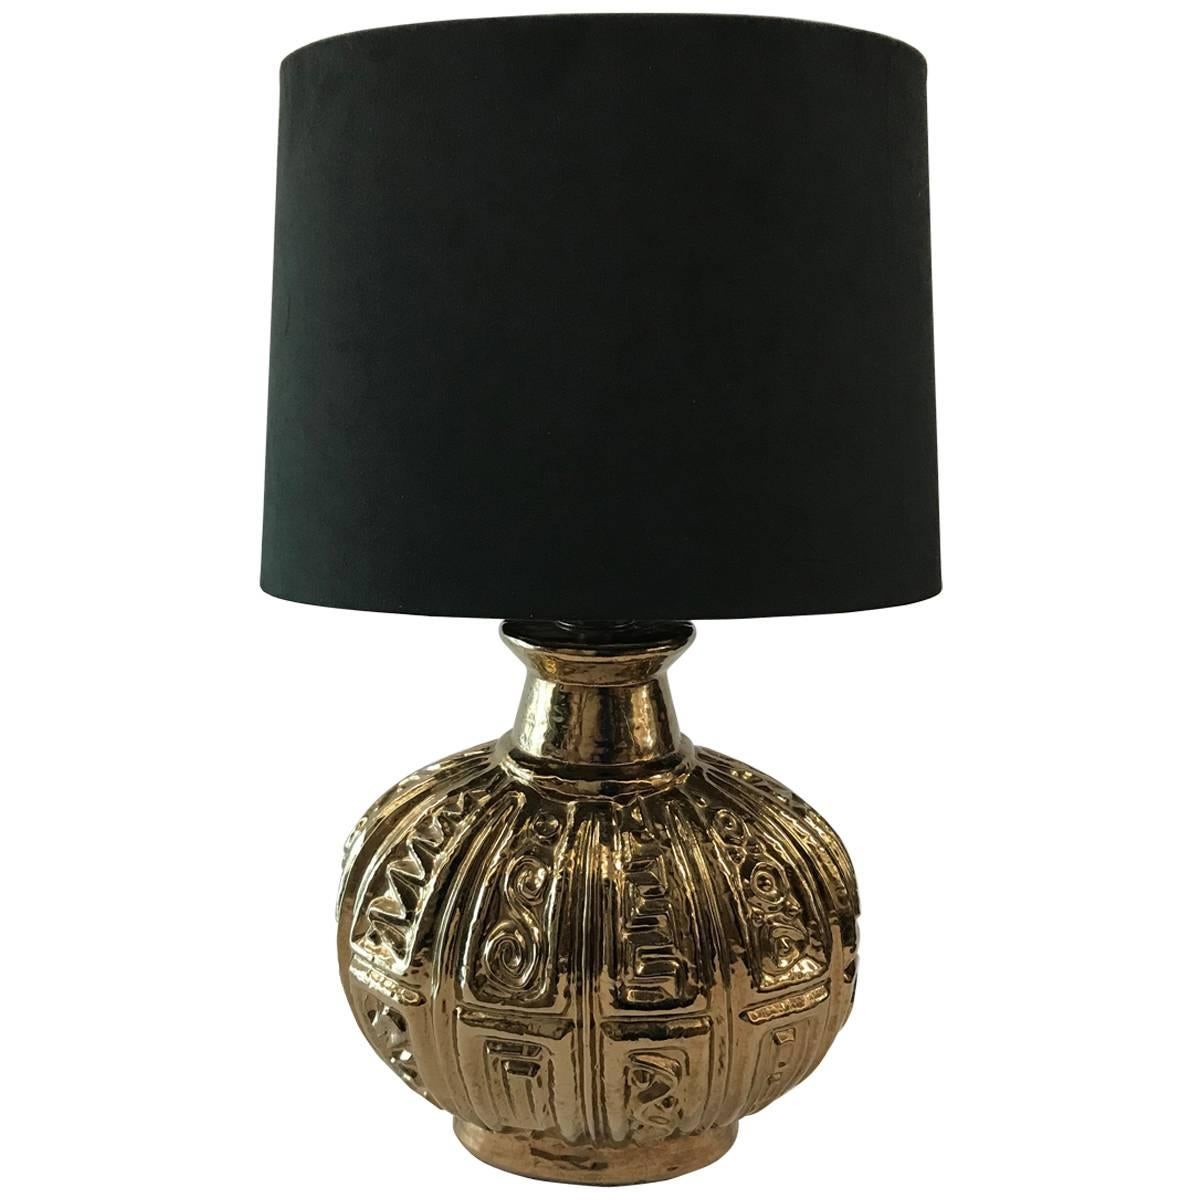 Mid-20th Century American Ceramic Lamp with Custom Brown Suede Shade